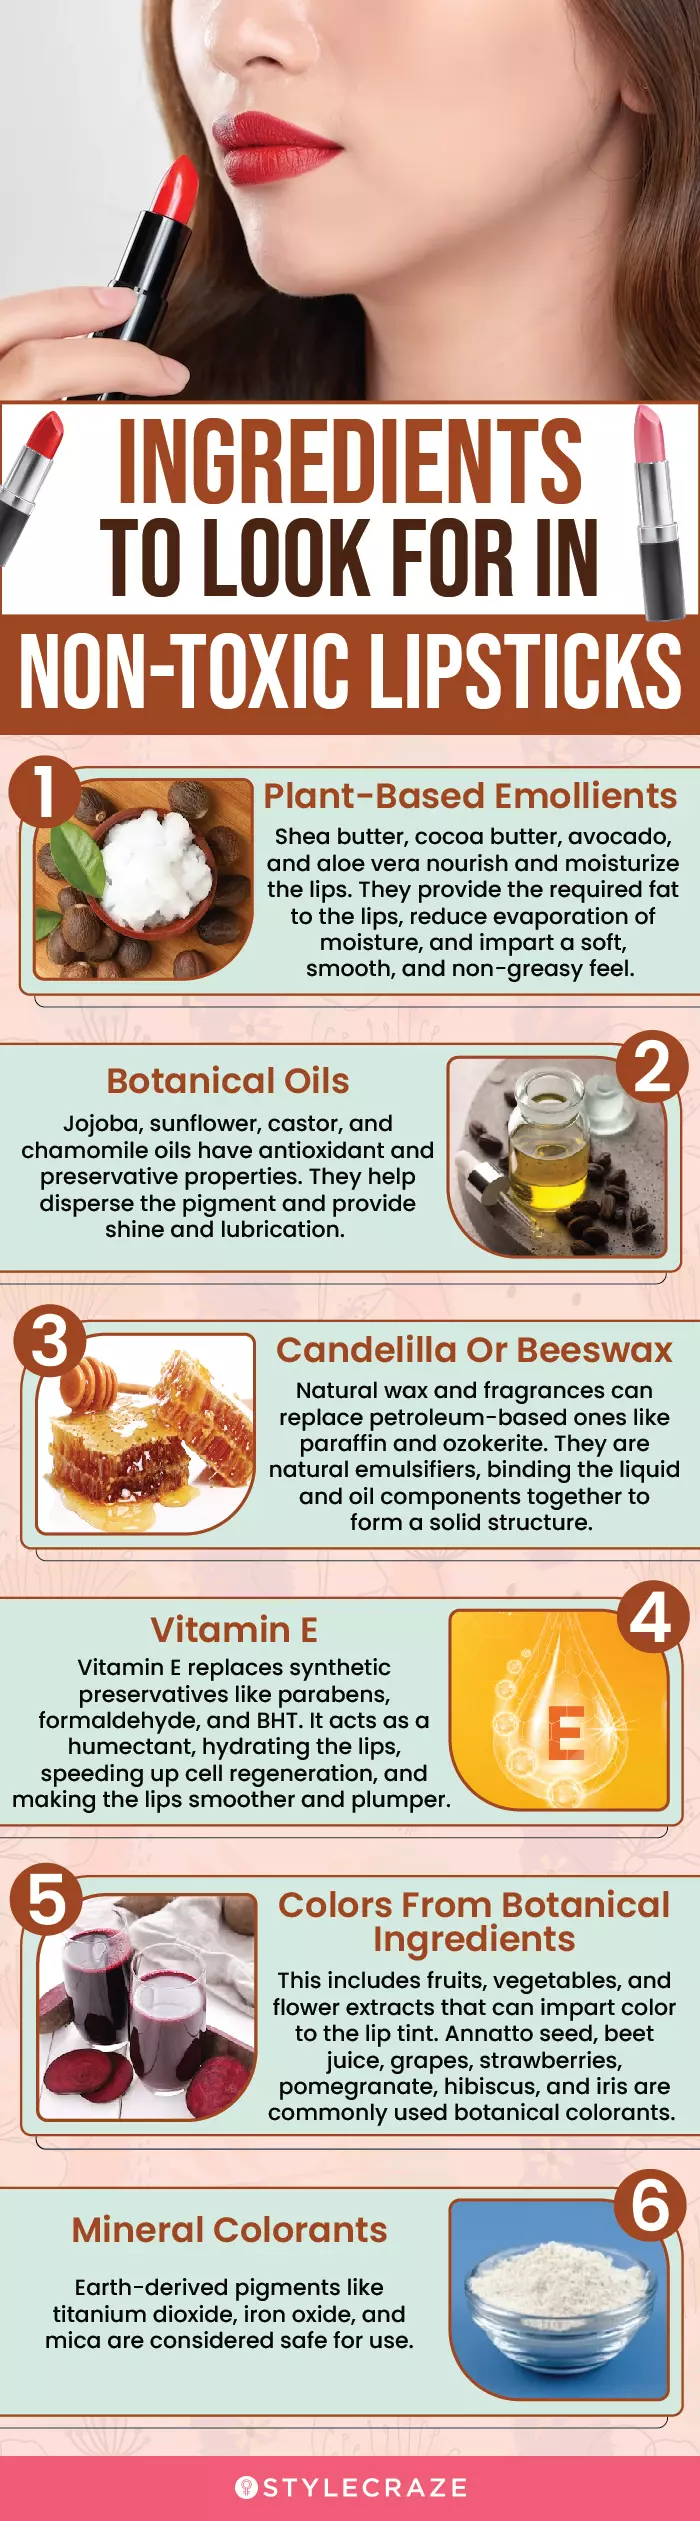 Ingredients To Look For In Non-Toxic Lipsticks (infographic)